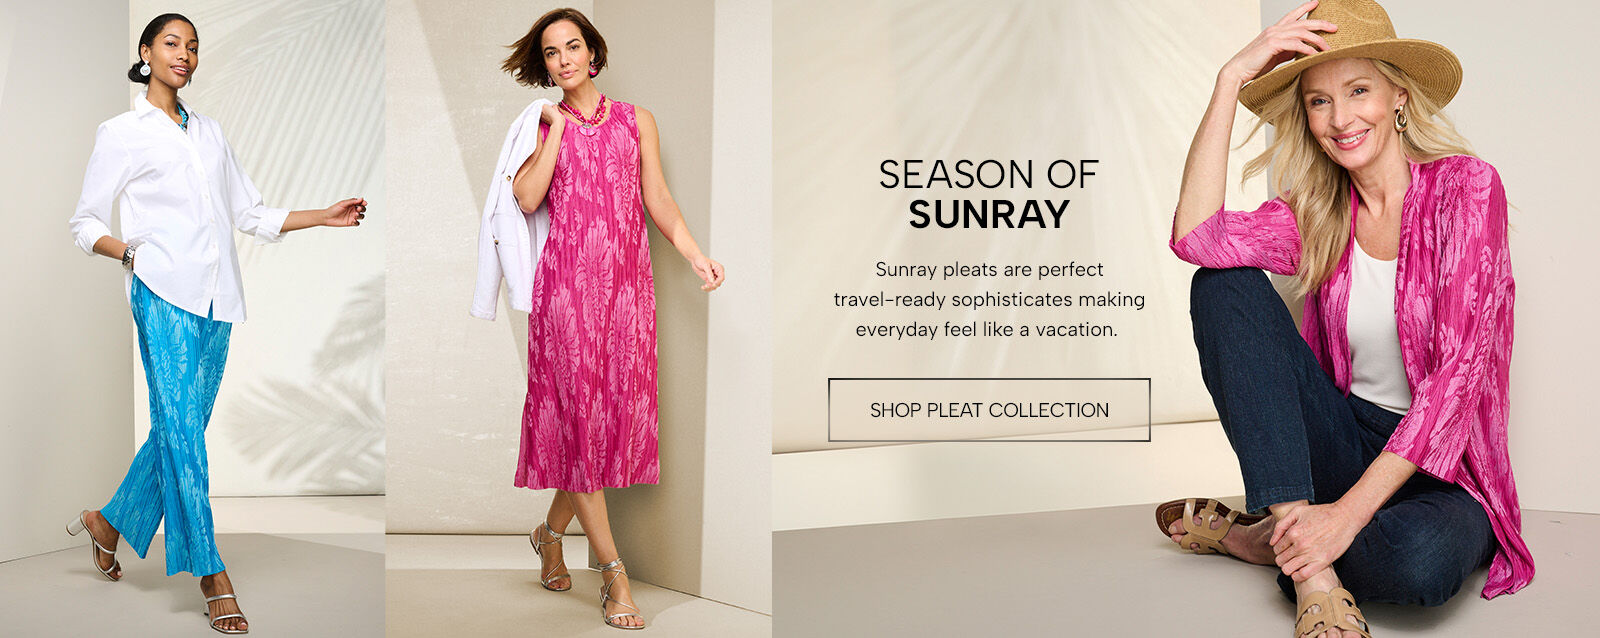 Season of Sunray - Sunray pleats are perfect travel-ready sophisticates making every day feel like a vacation. Shop Pleat Collection